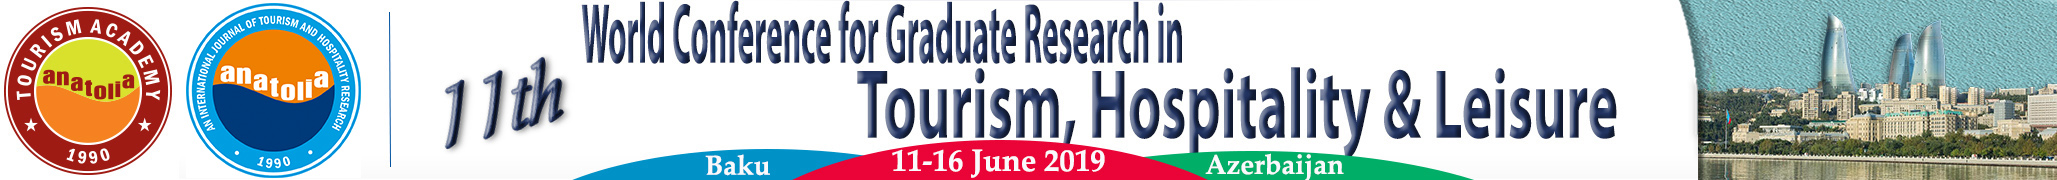 World Conference for Graduate Research in Tourism Hospitality and Leisure